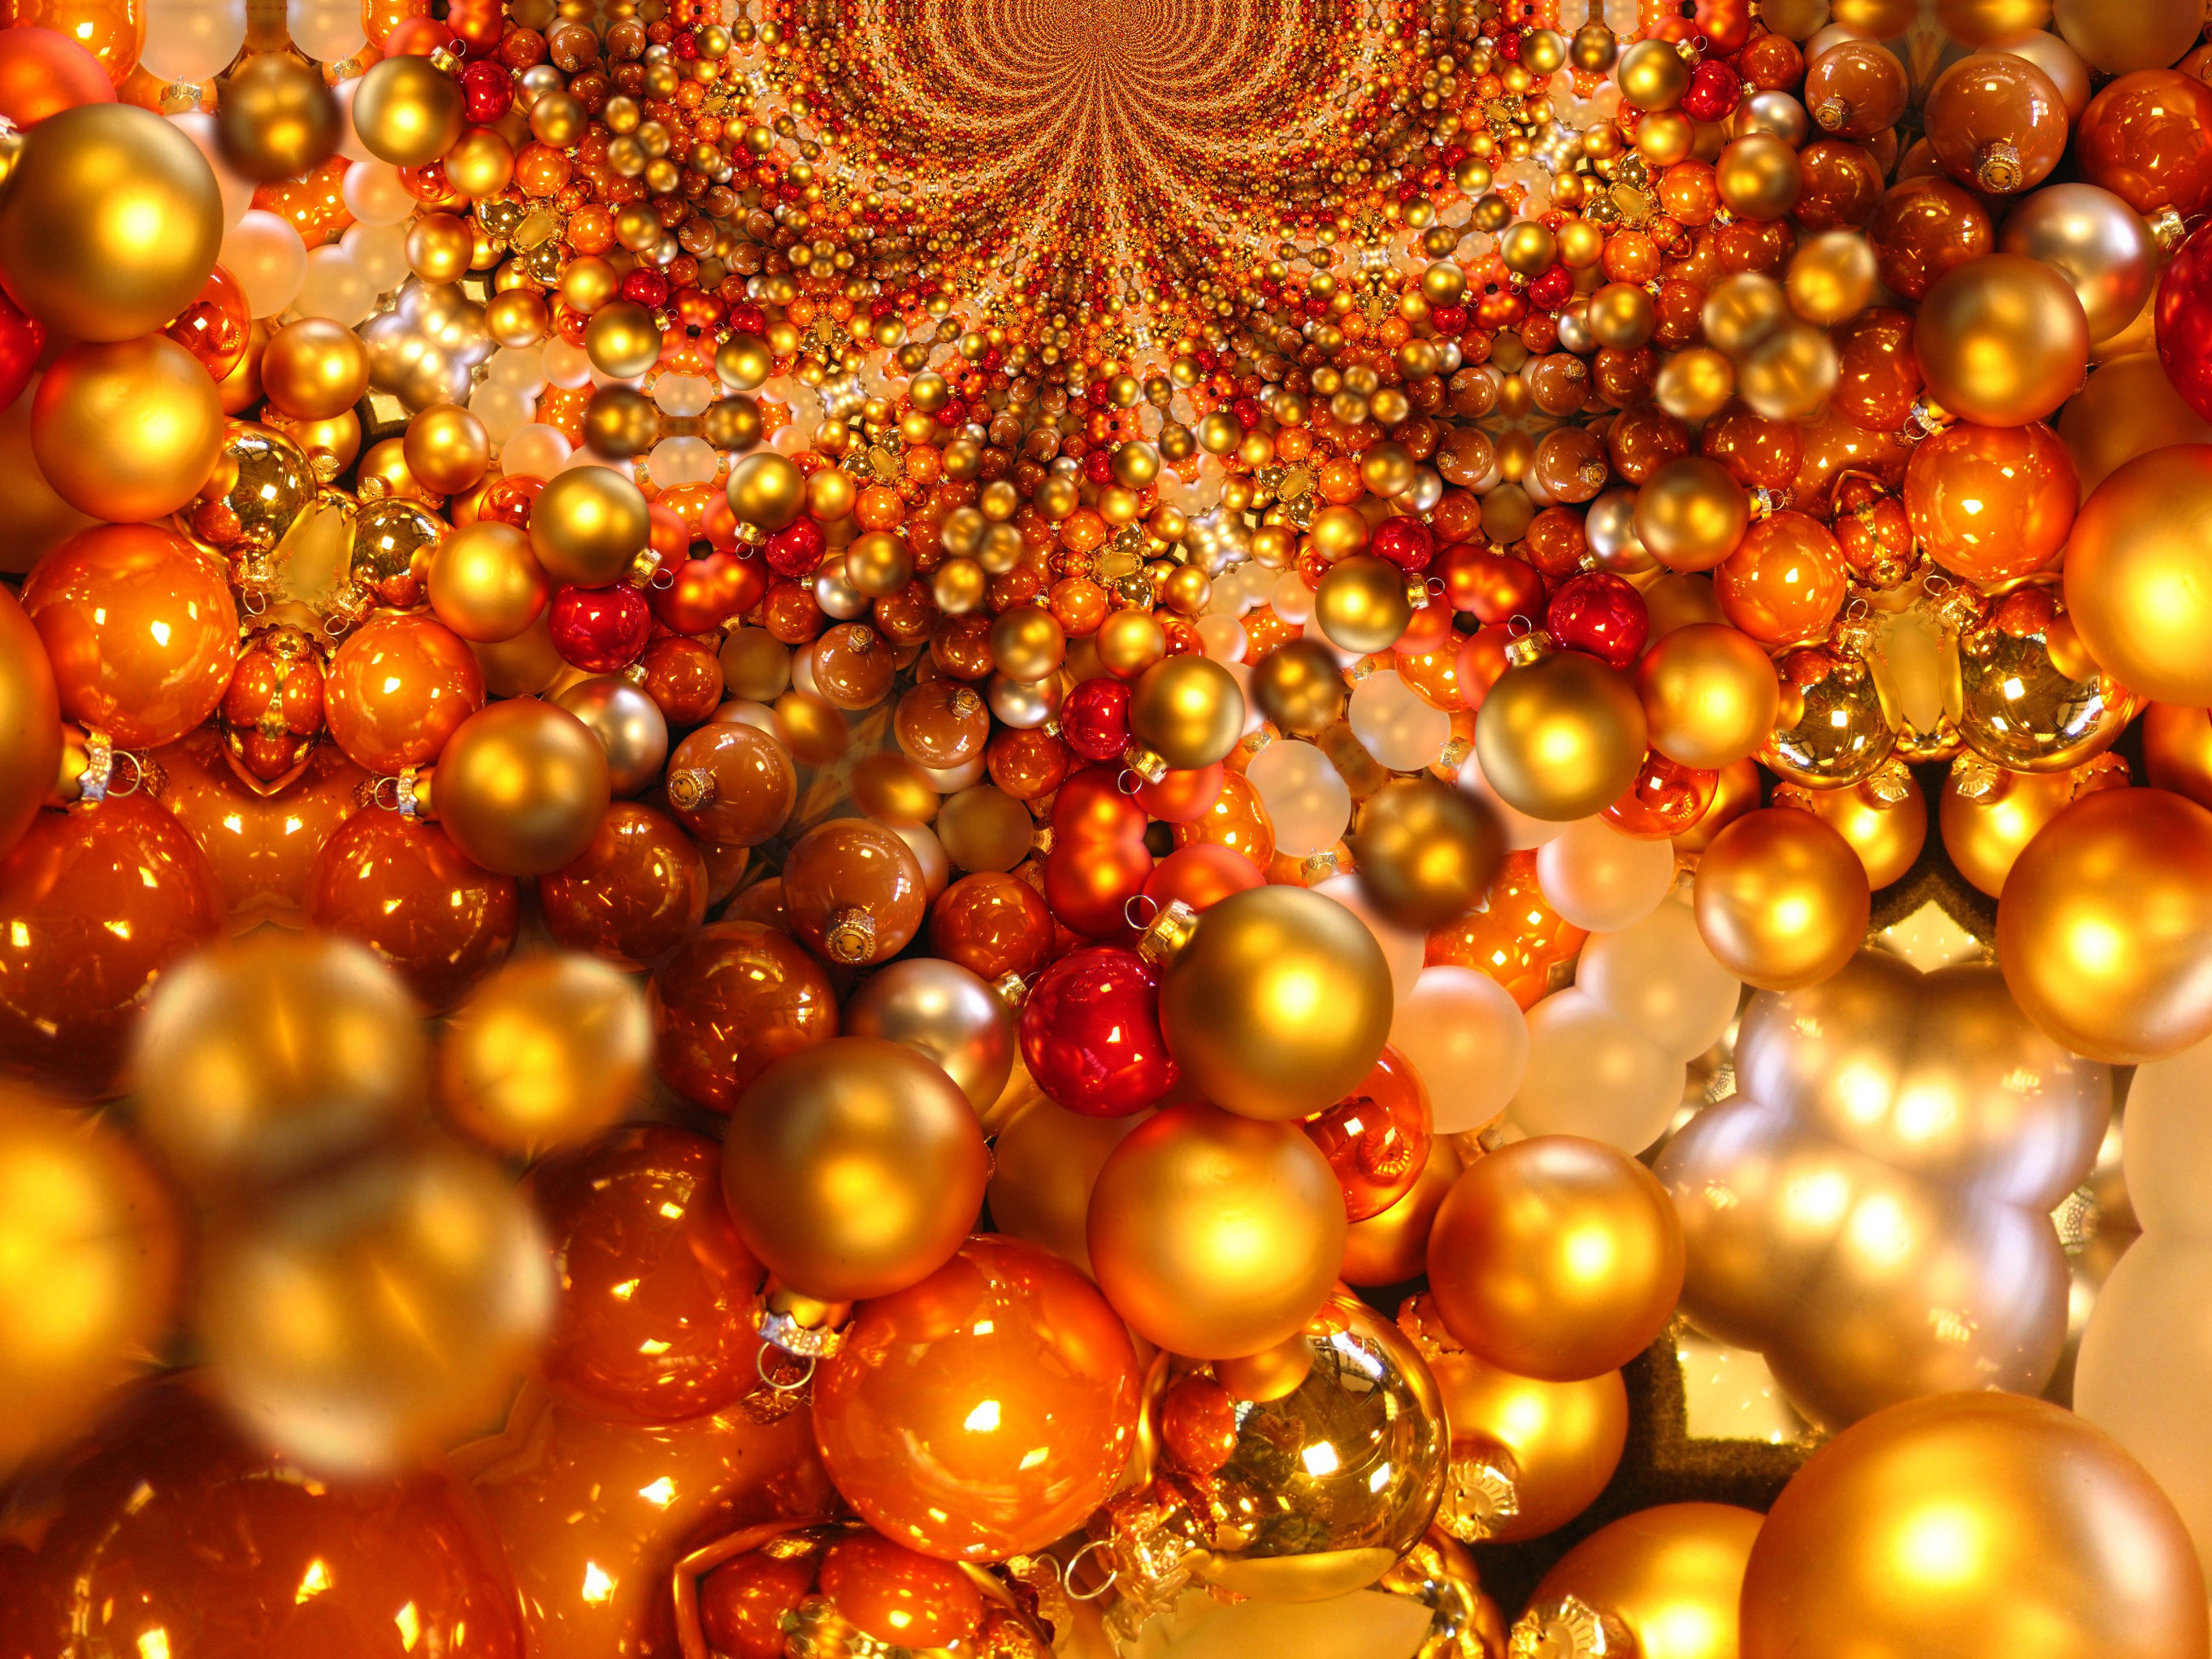 Great Ball Or Bauble Themed Christmas Wallpaper